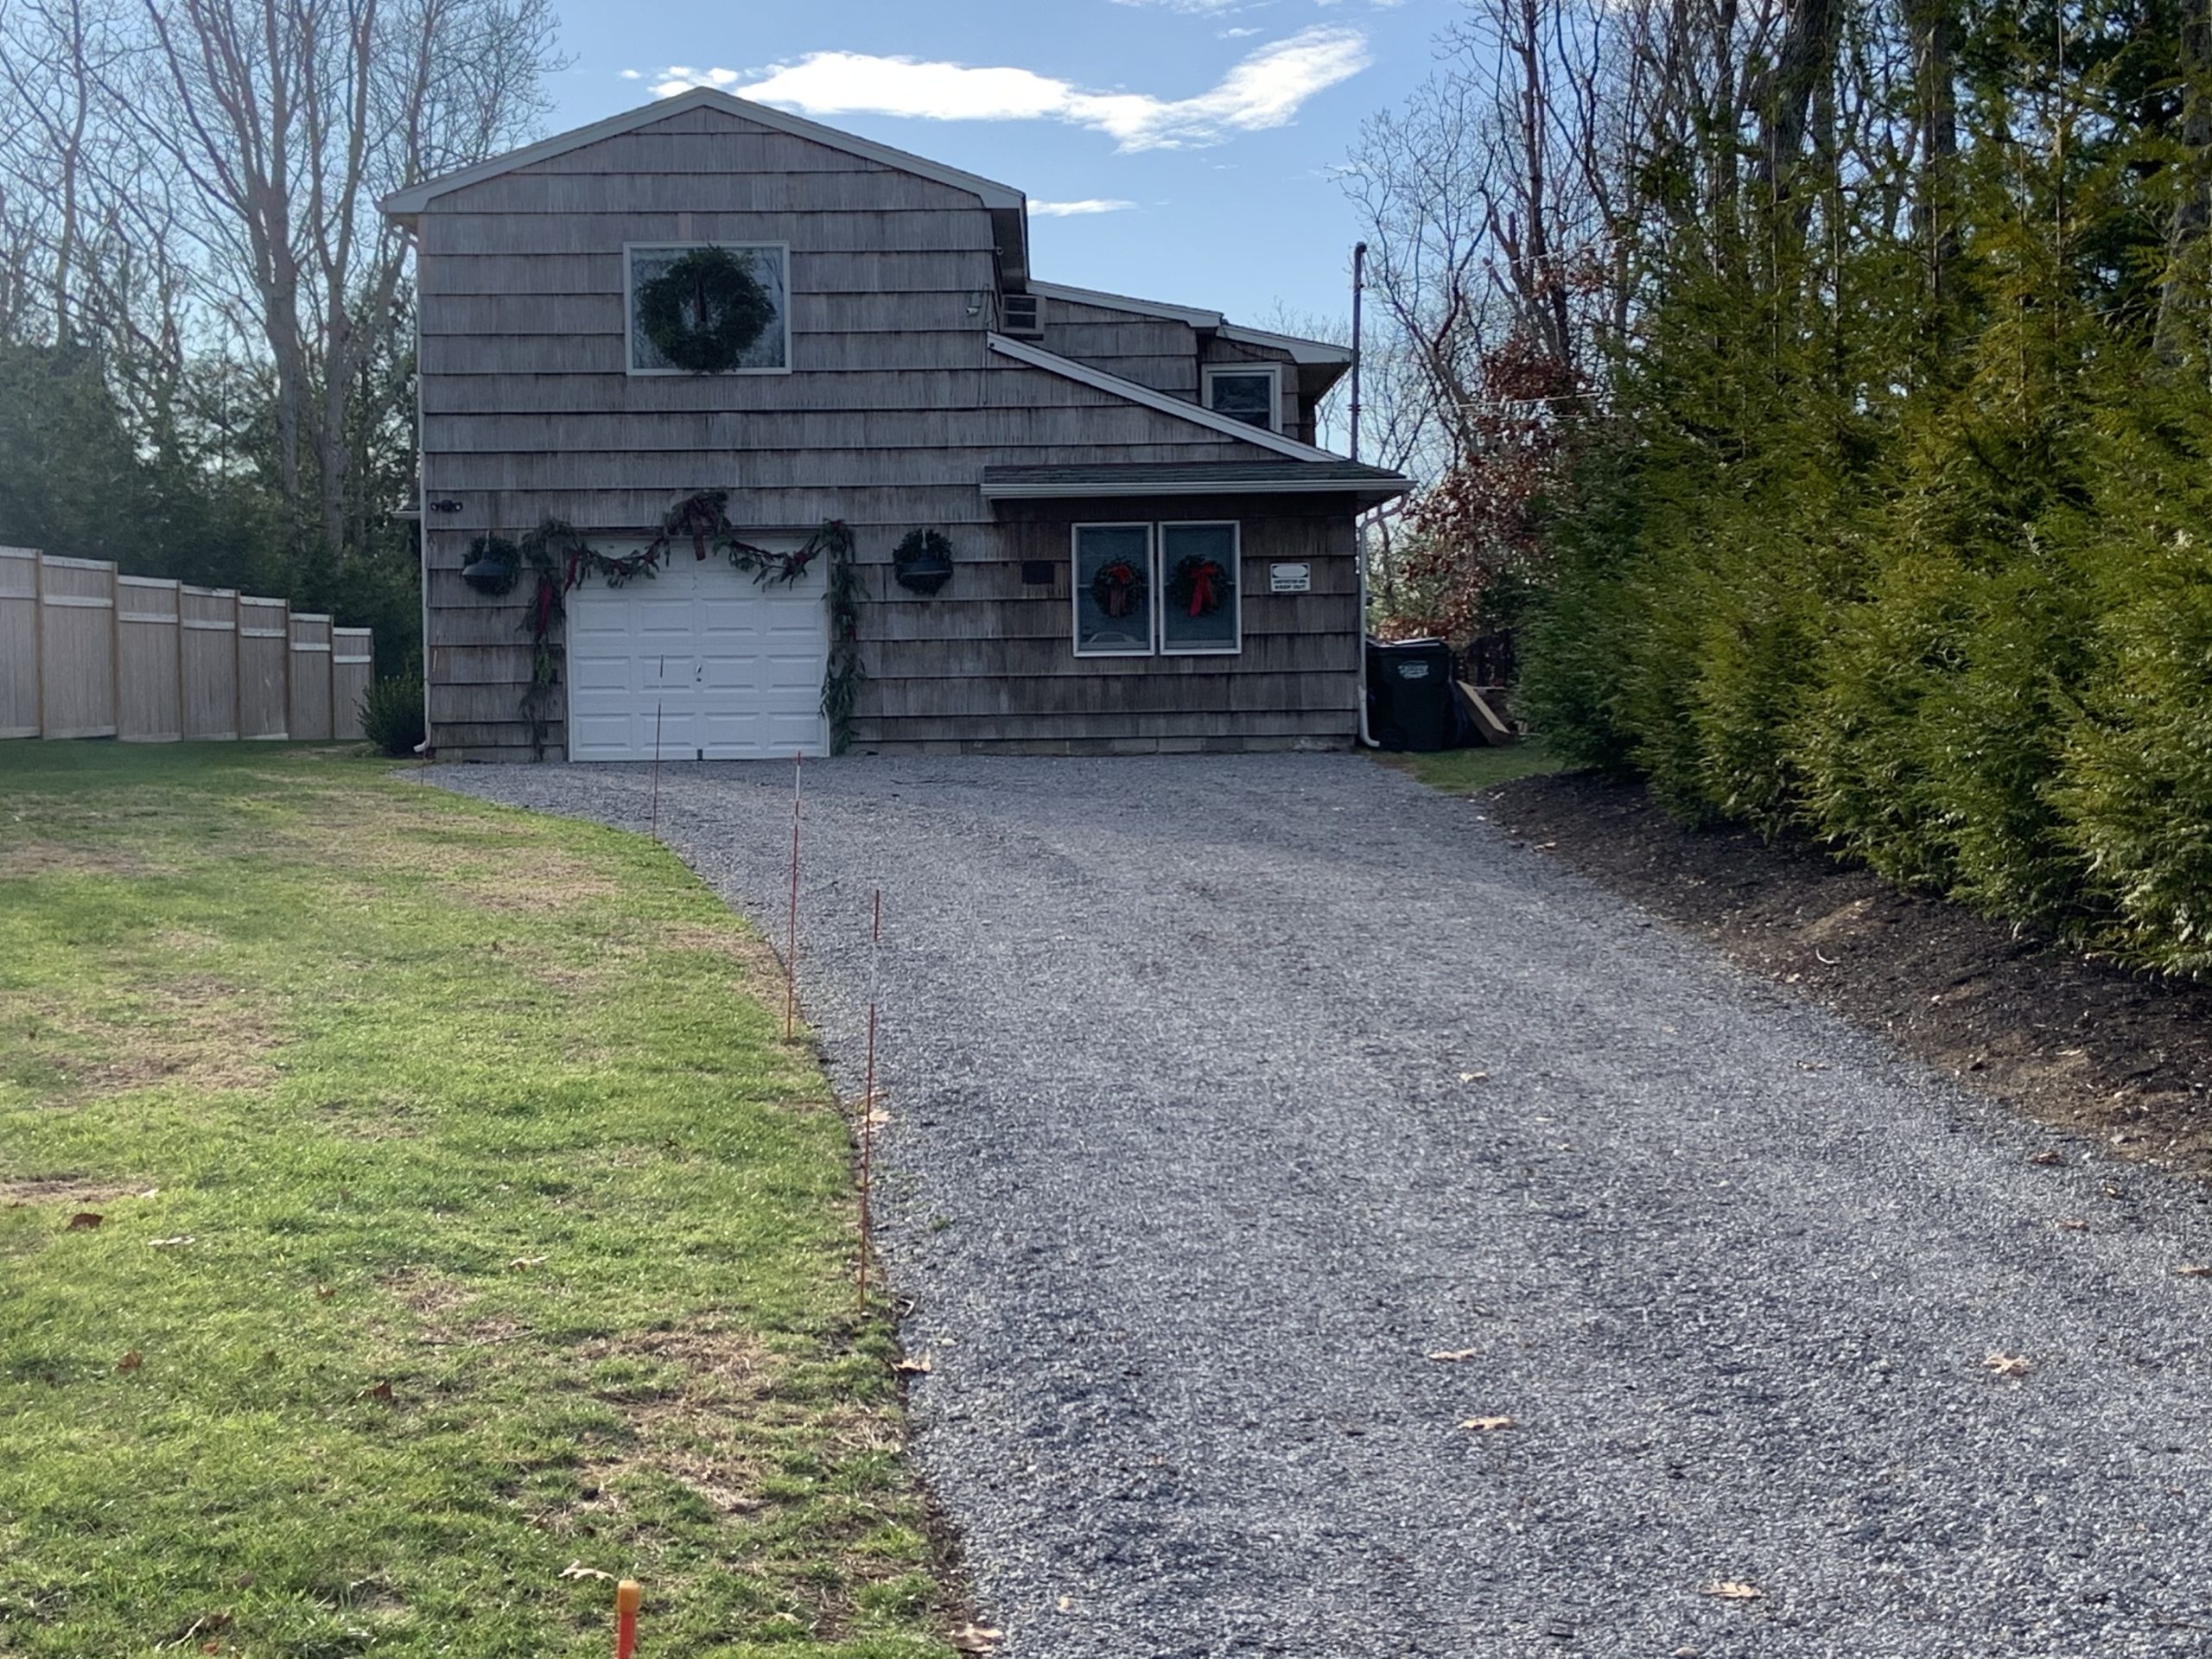 A lawsuit challenging the Sag Harbor Village Zoning Board of Appeals denial of pyramid variances for this house at 11 Carver Street has been dismissed. STEPHEN J. KOTZ